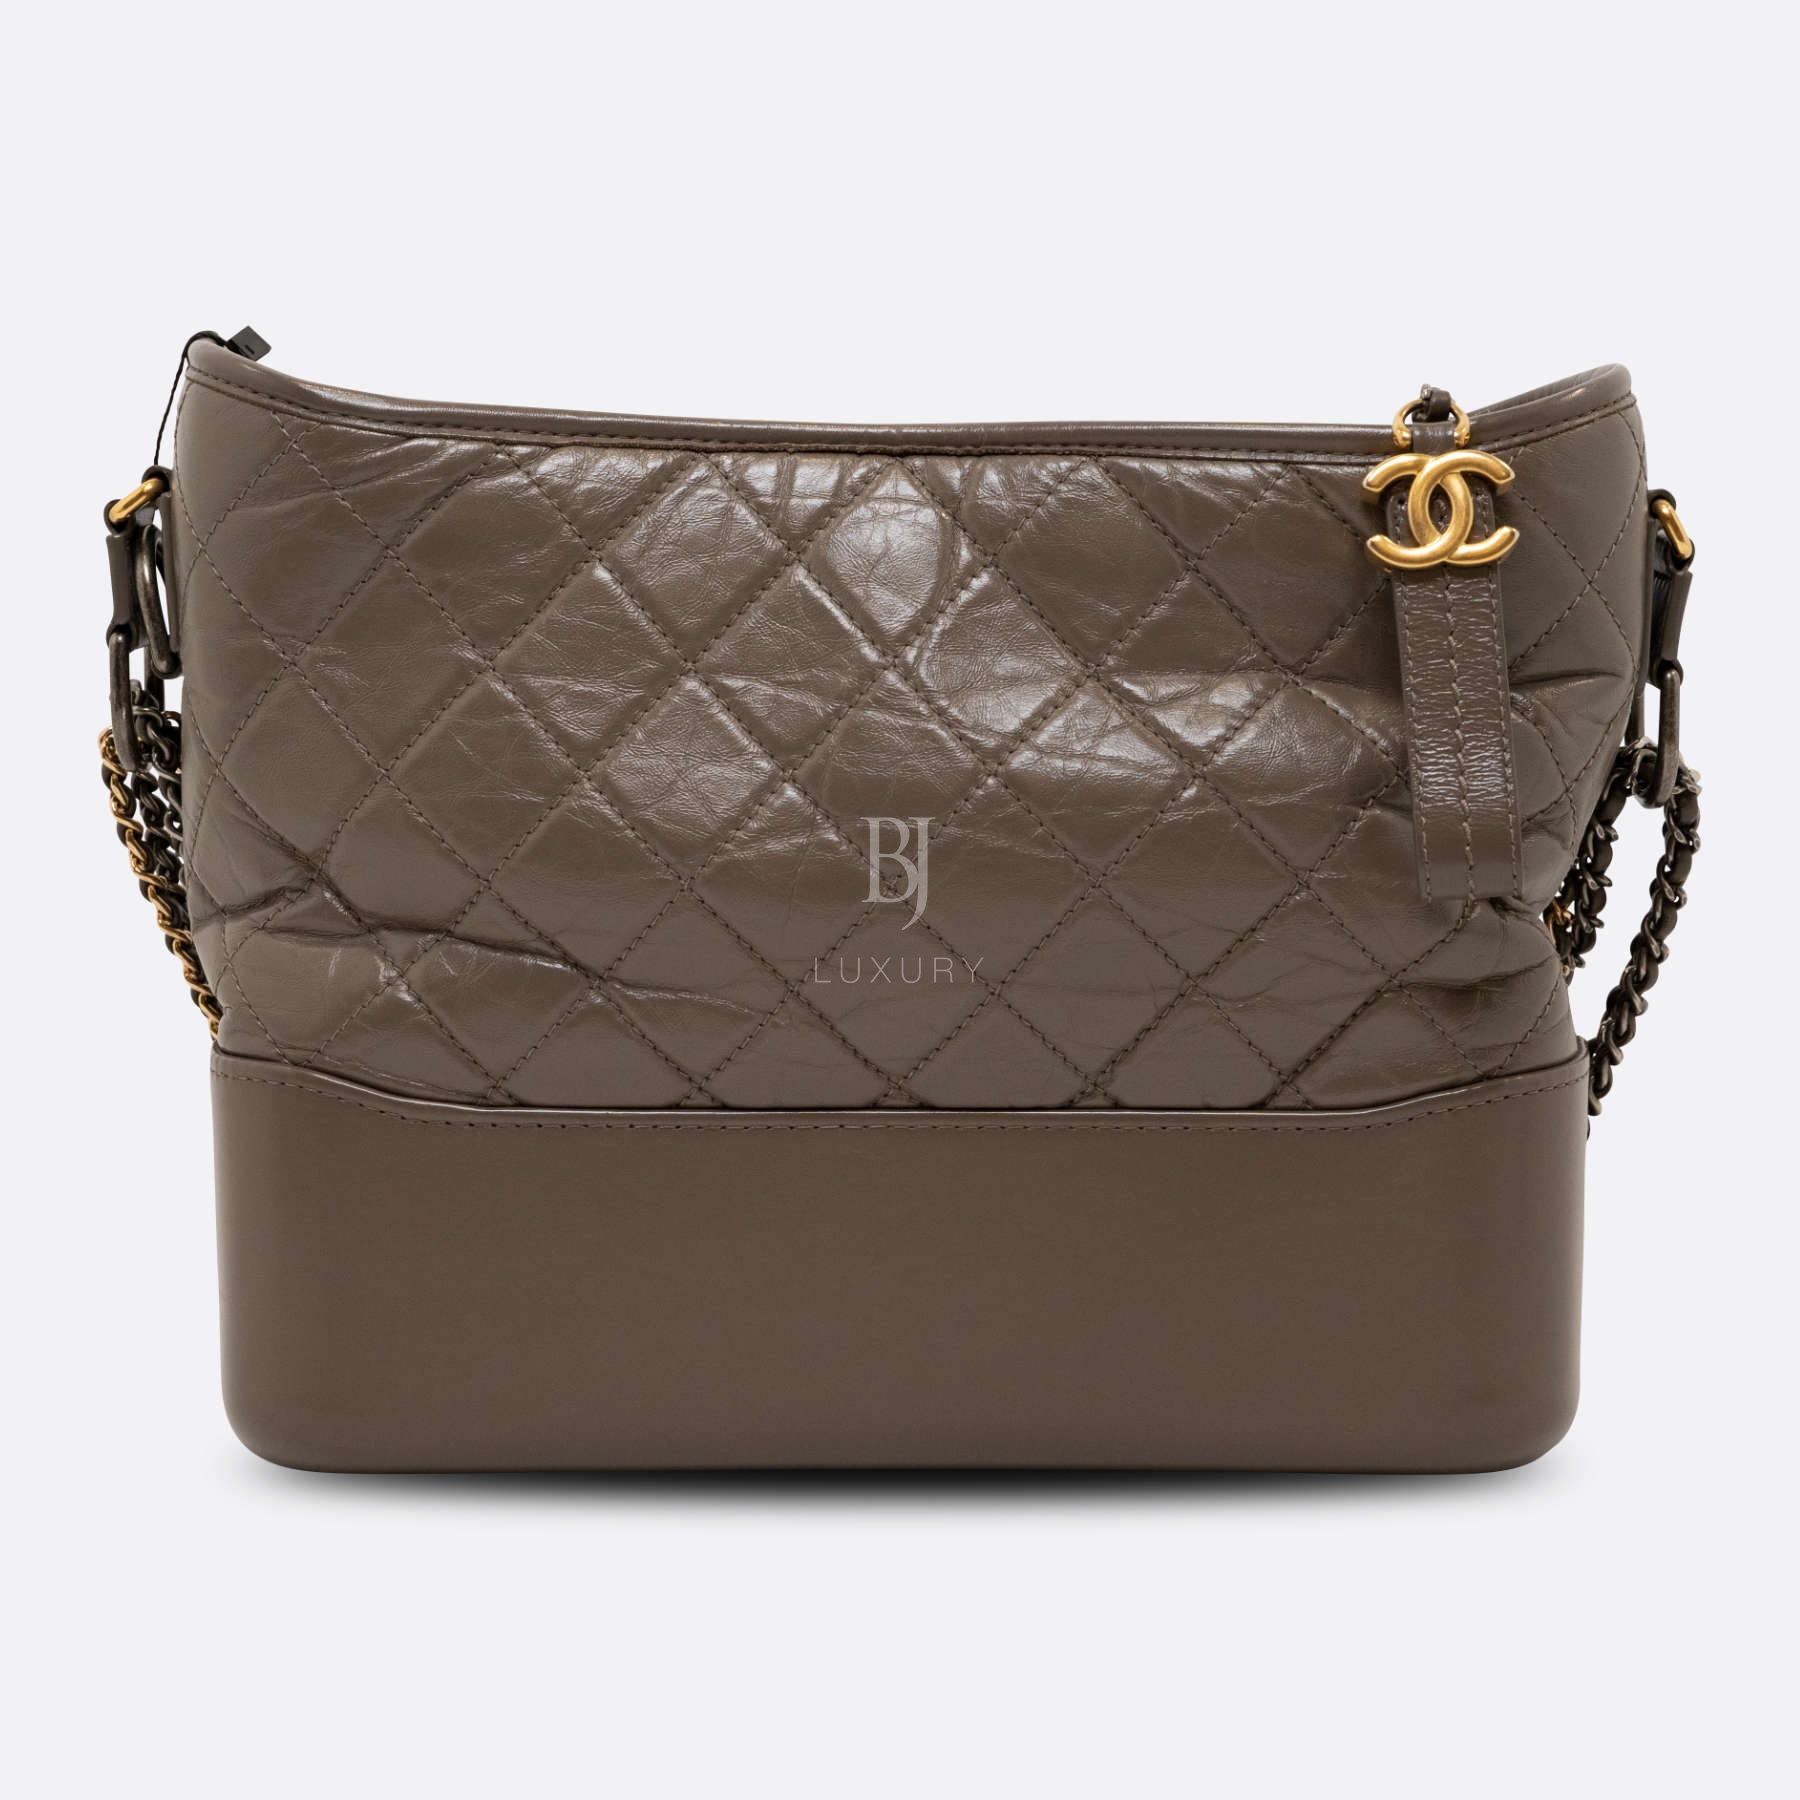 CHANEL-GABRIELLE-LARGE-TAUPE-CALF-4283 front.jpg